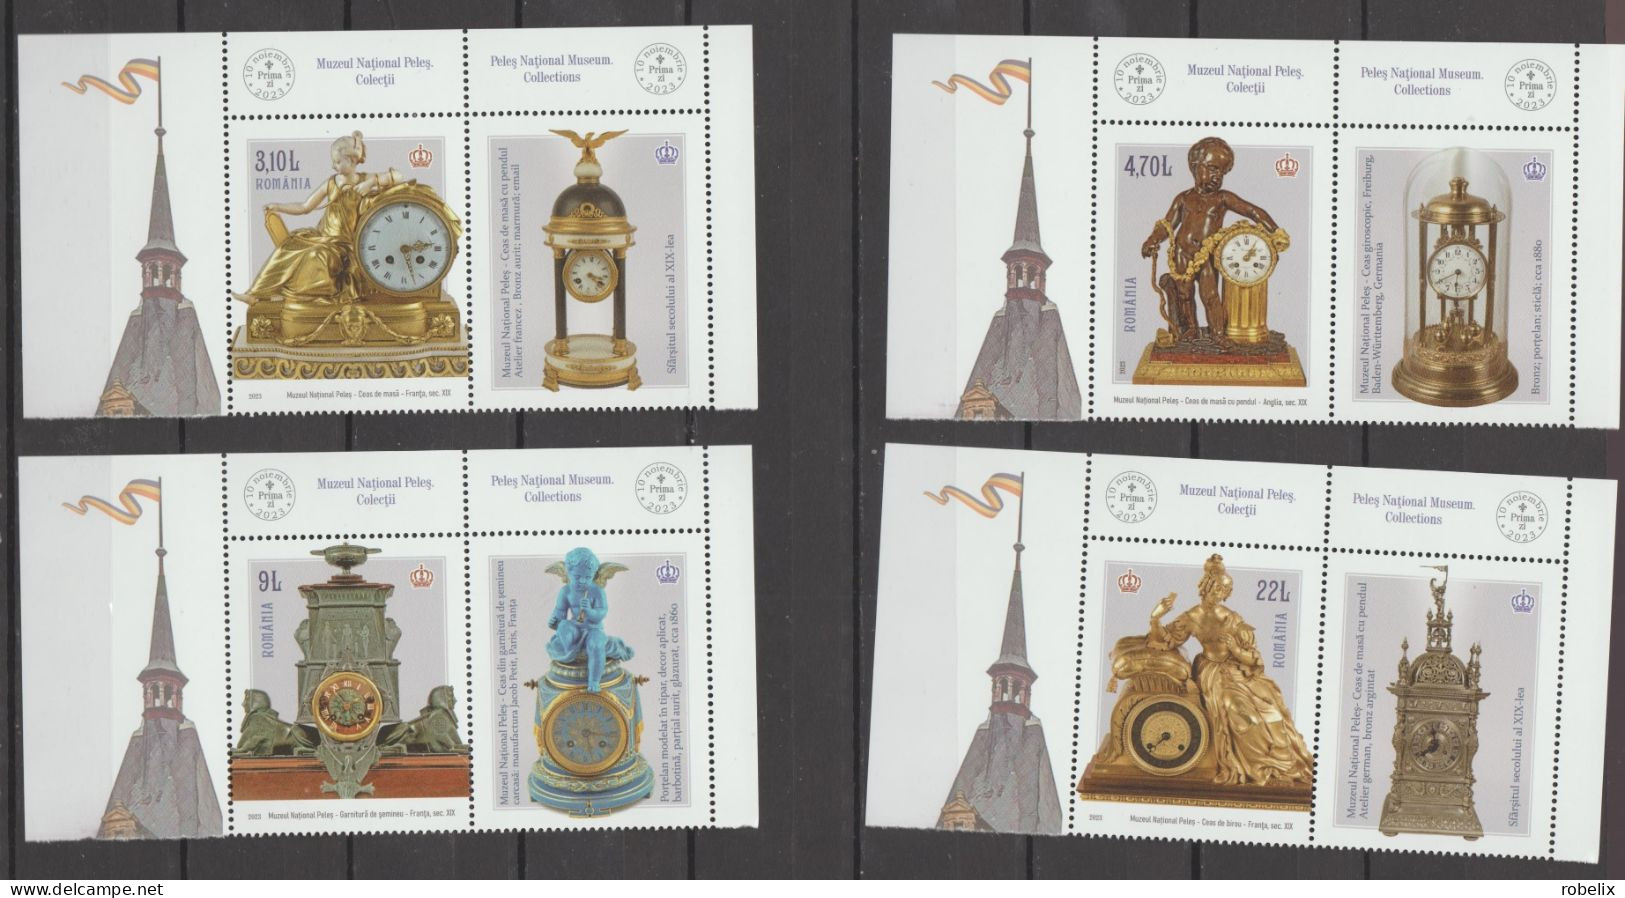 ROMANIA 2023  PELEȘ NATIONAL MUSEUM - COLLECTIONS - CLOCKS  Set Of 4 Stamps With Labels  MNH** - Horloges